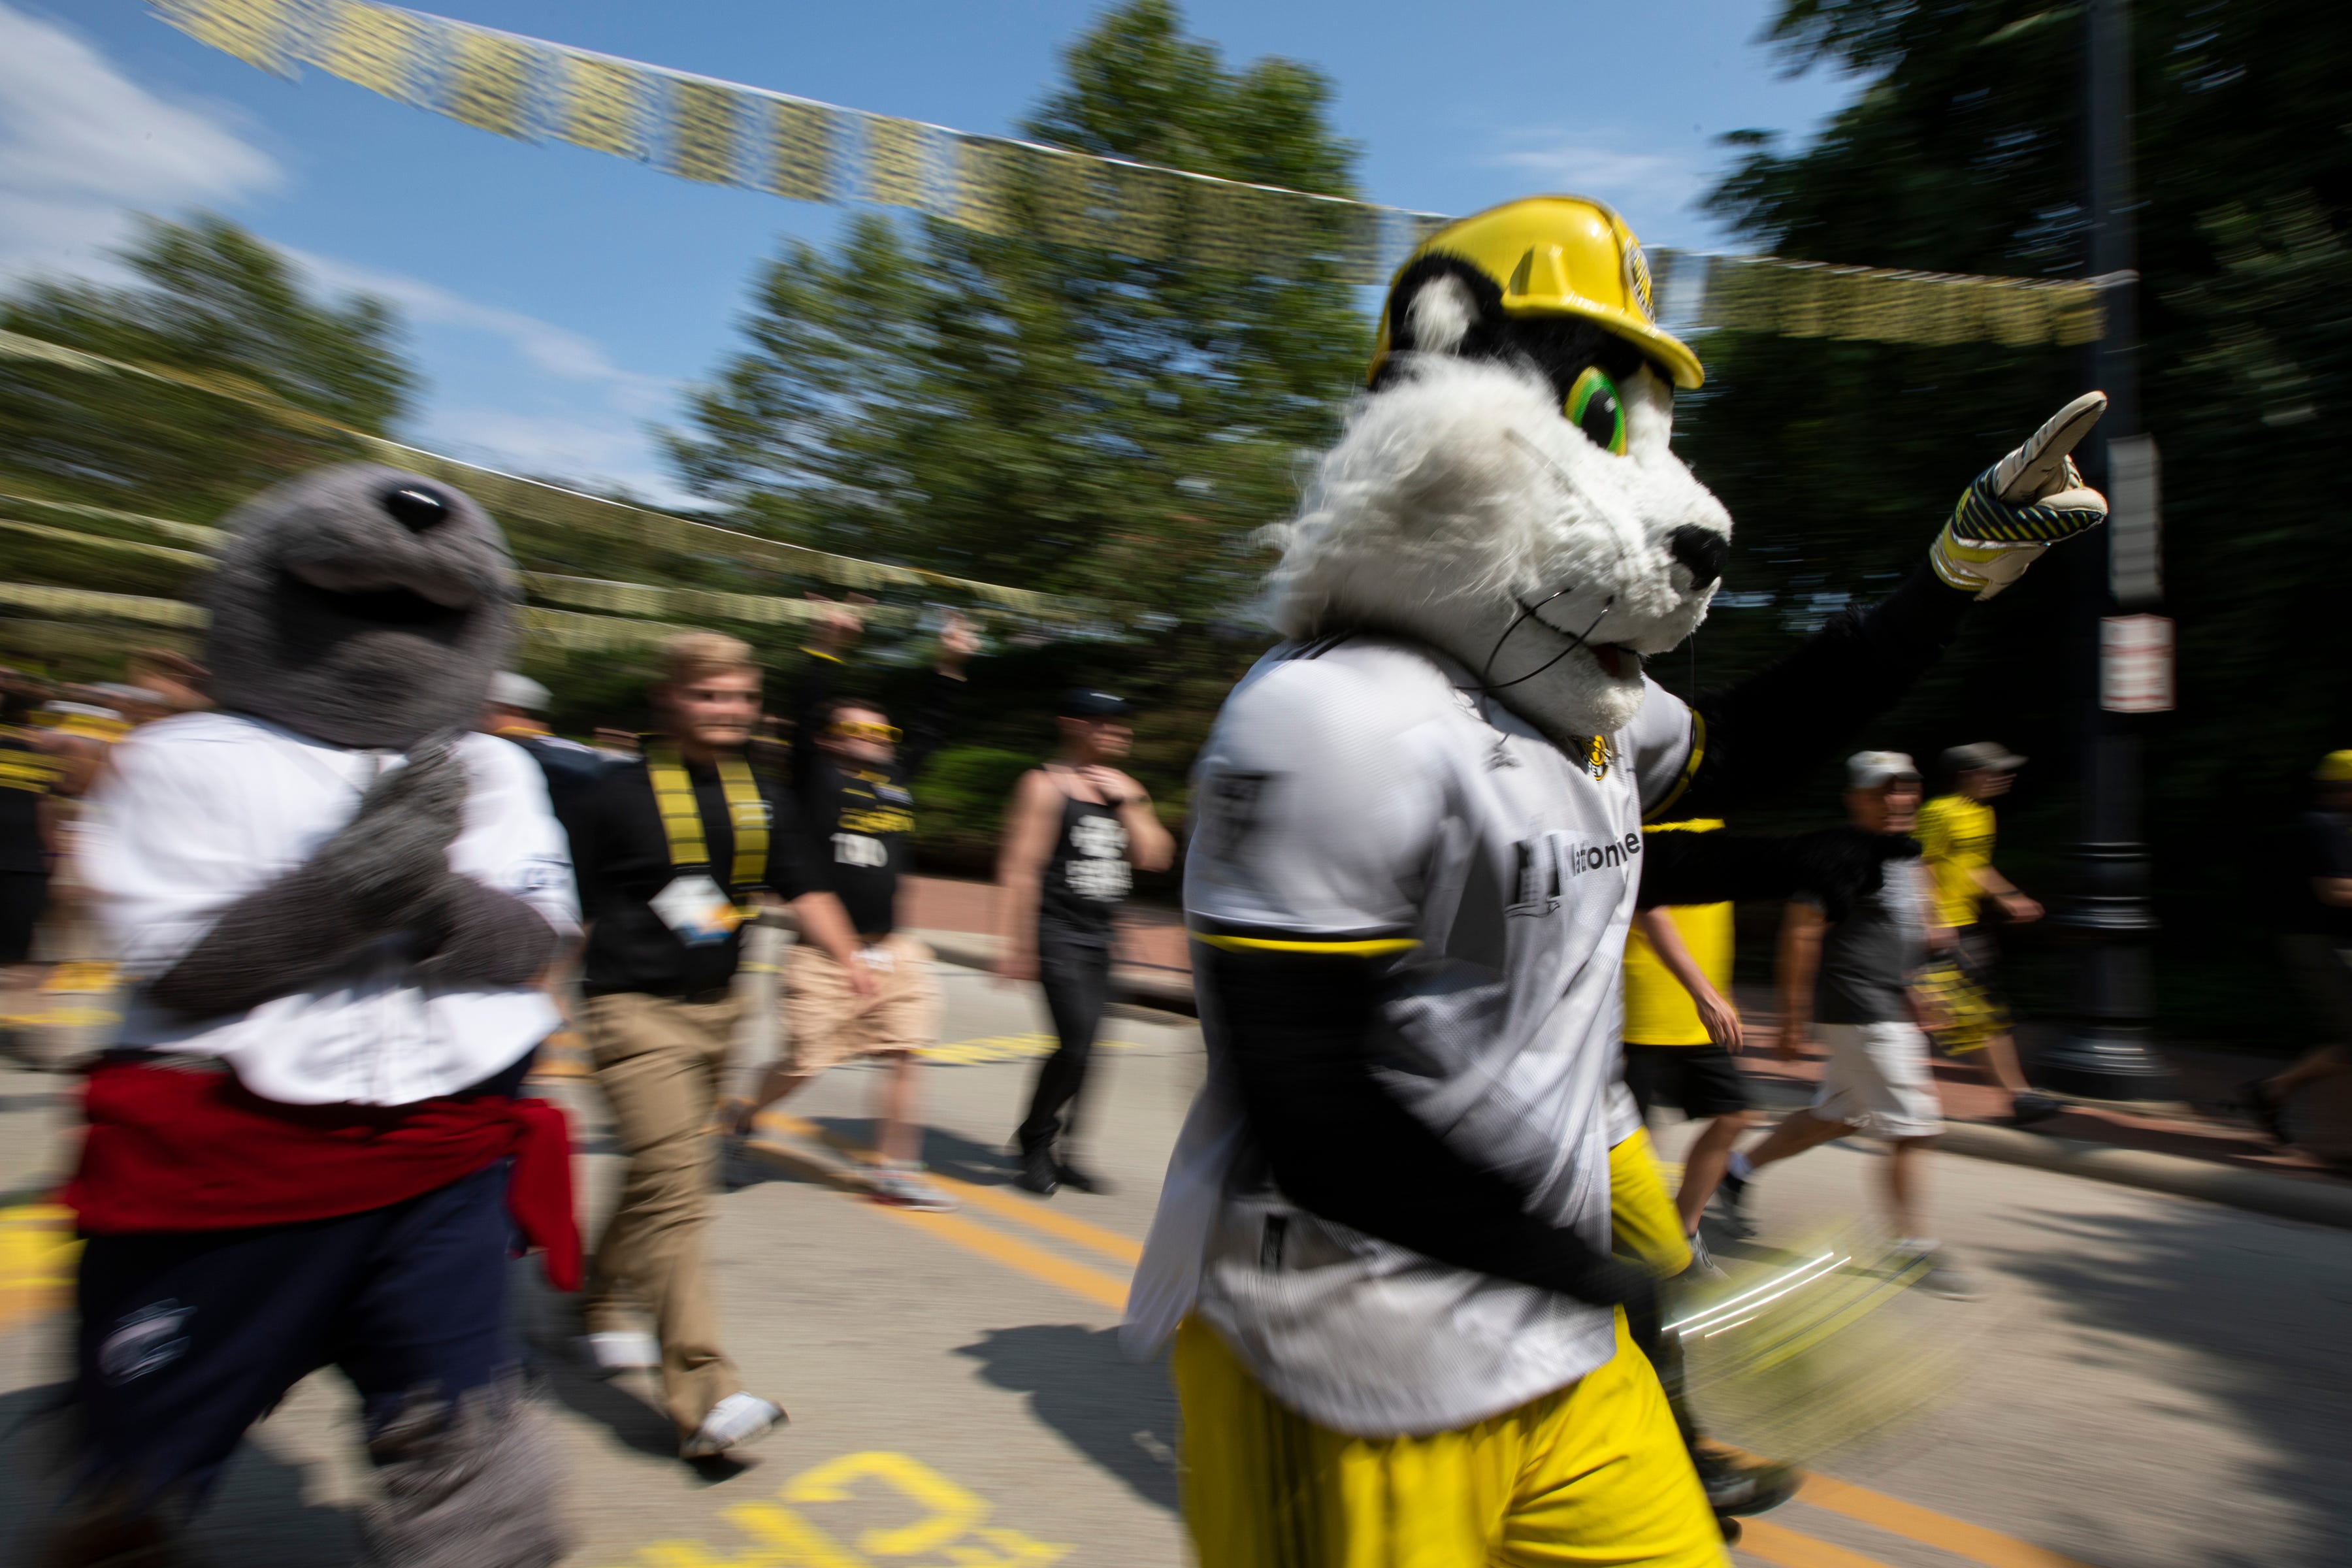 The Columbus Crew mascot, S.C. marches with fans to Lower.com Field before the soccer game against the New England Revolution in Columbus, Ohio July 3.